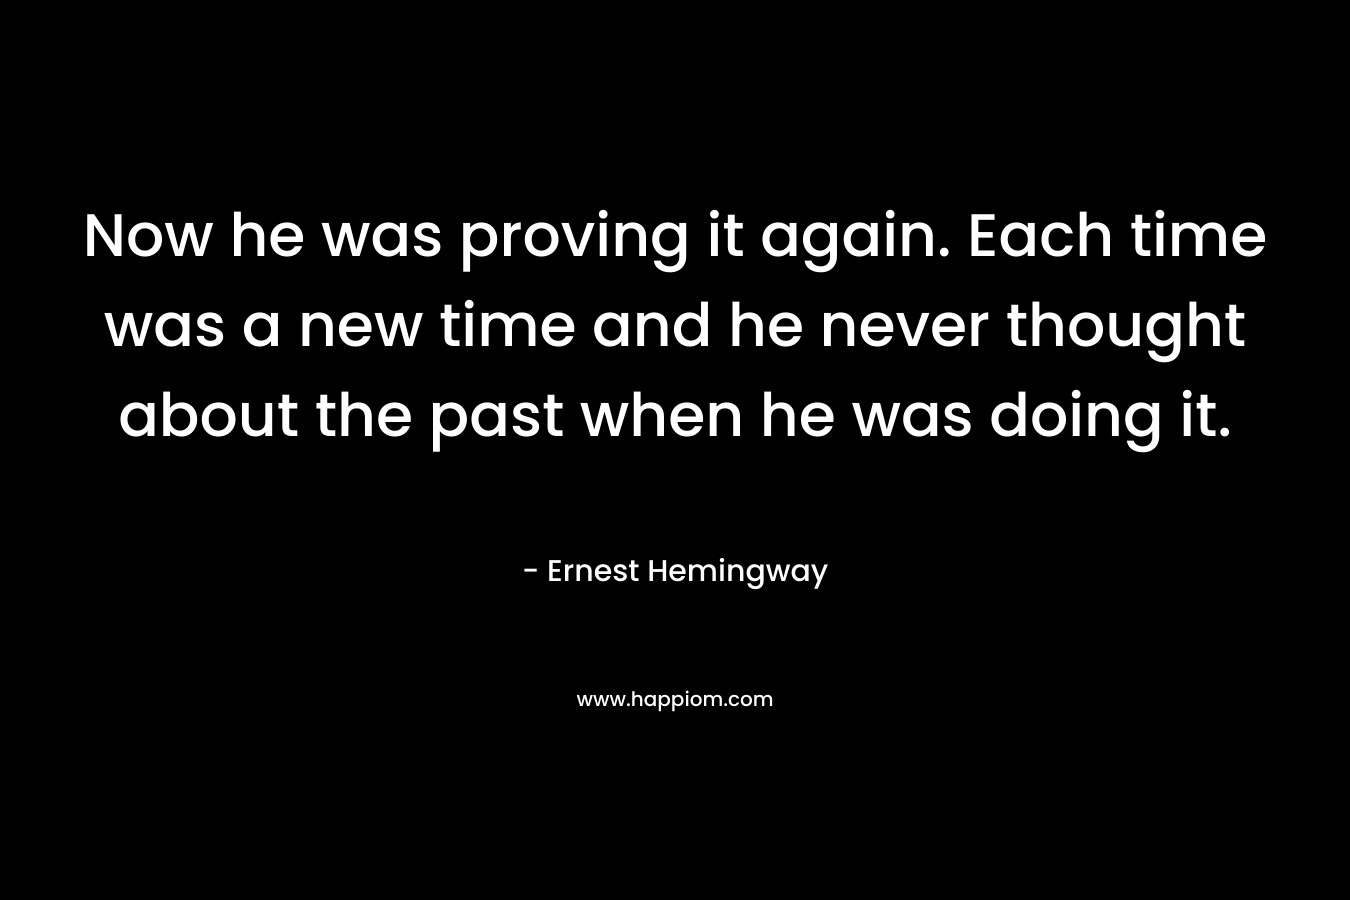 Now he was proving it again. Each time was a new time and he never thought about the past when he was doing it. – Ernest Hemingway